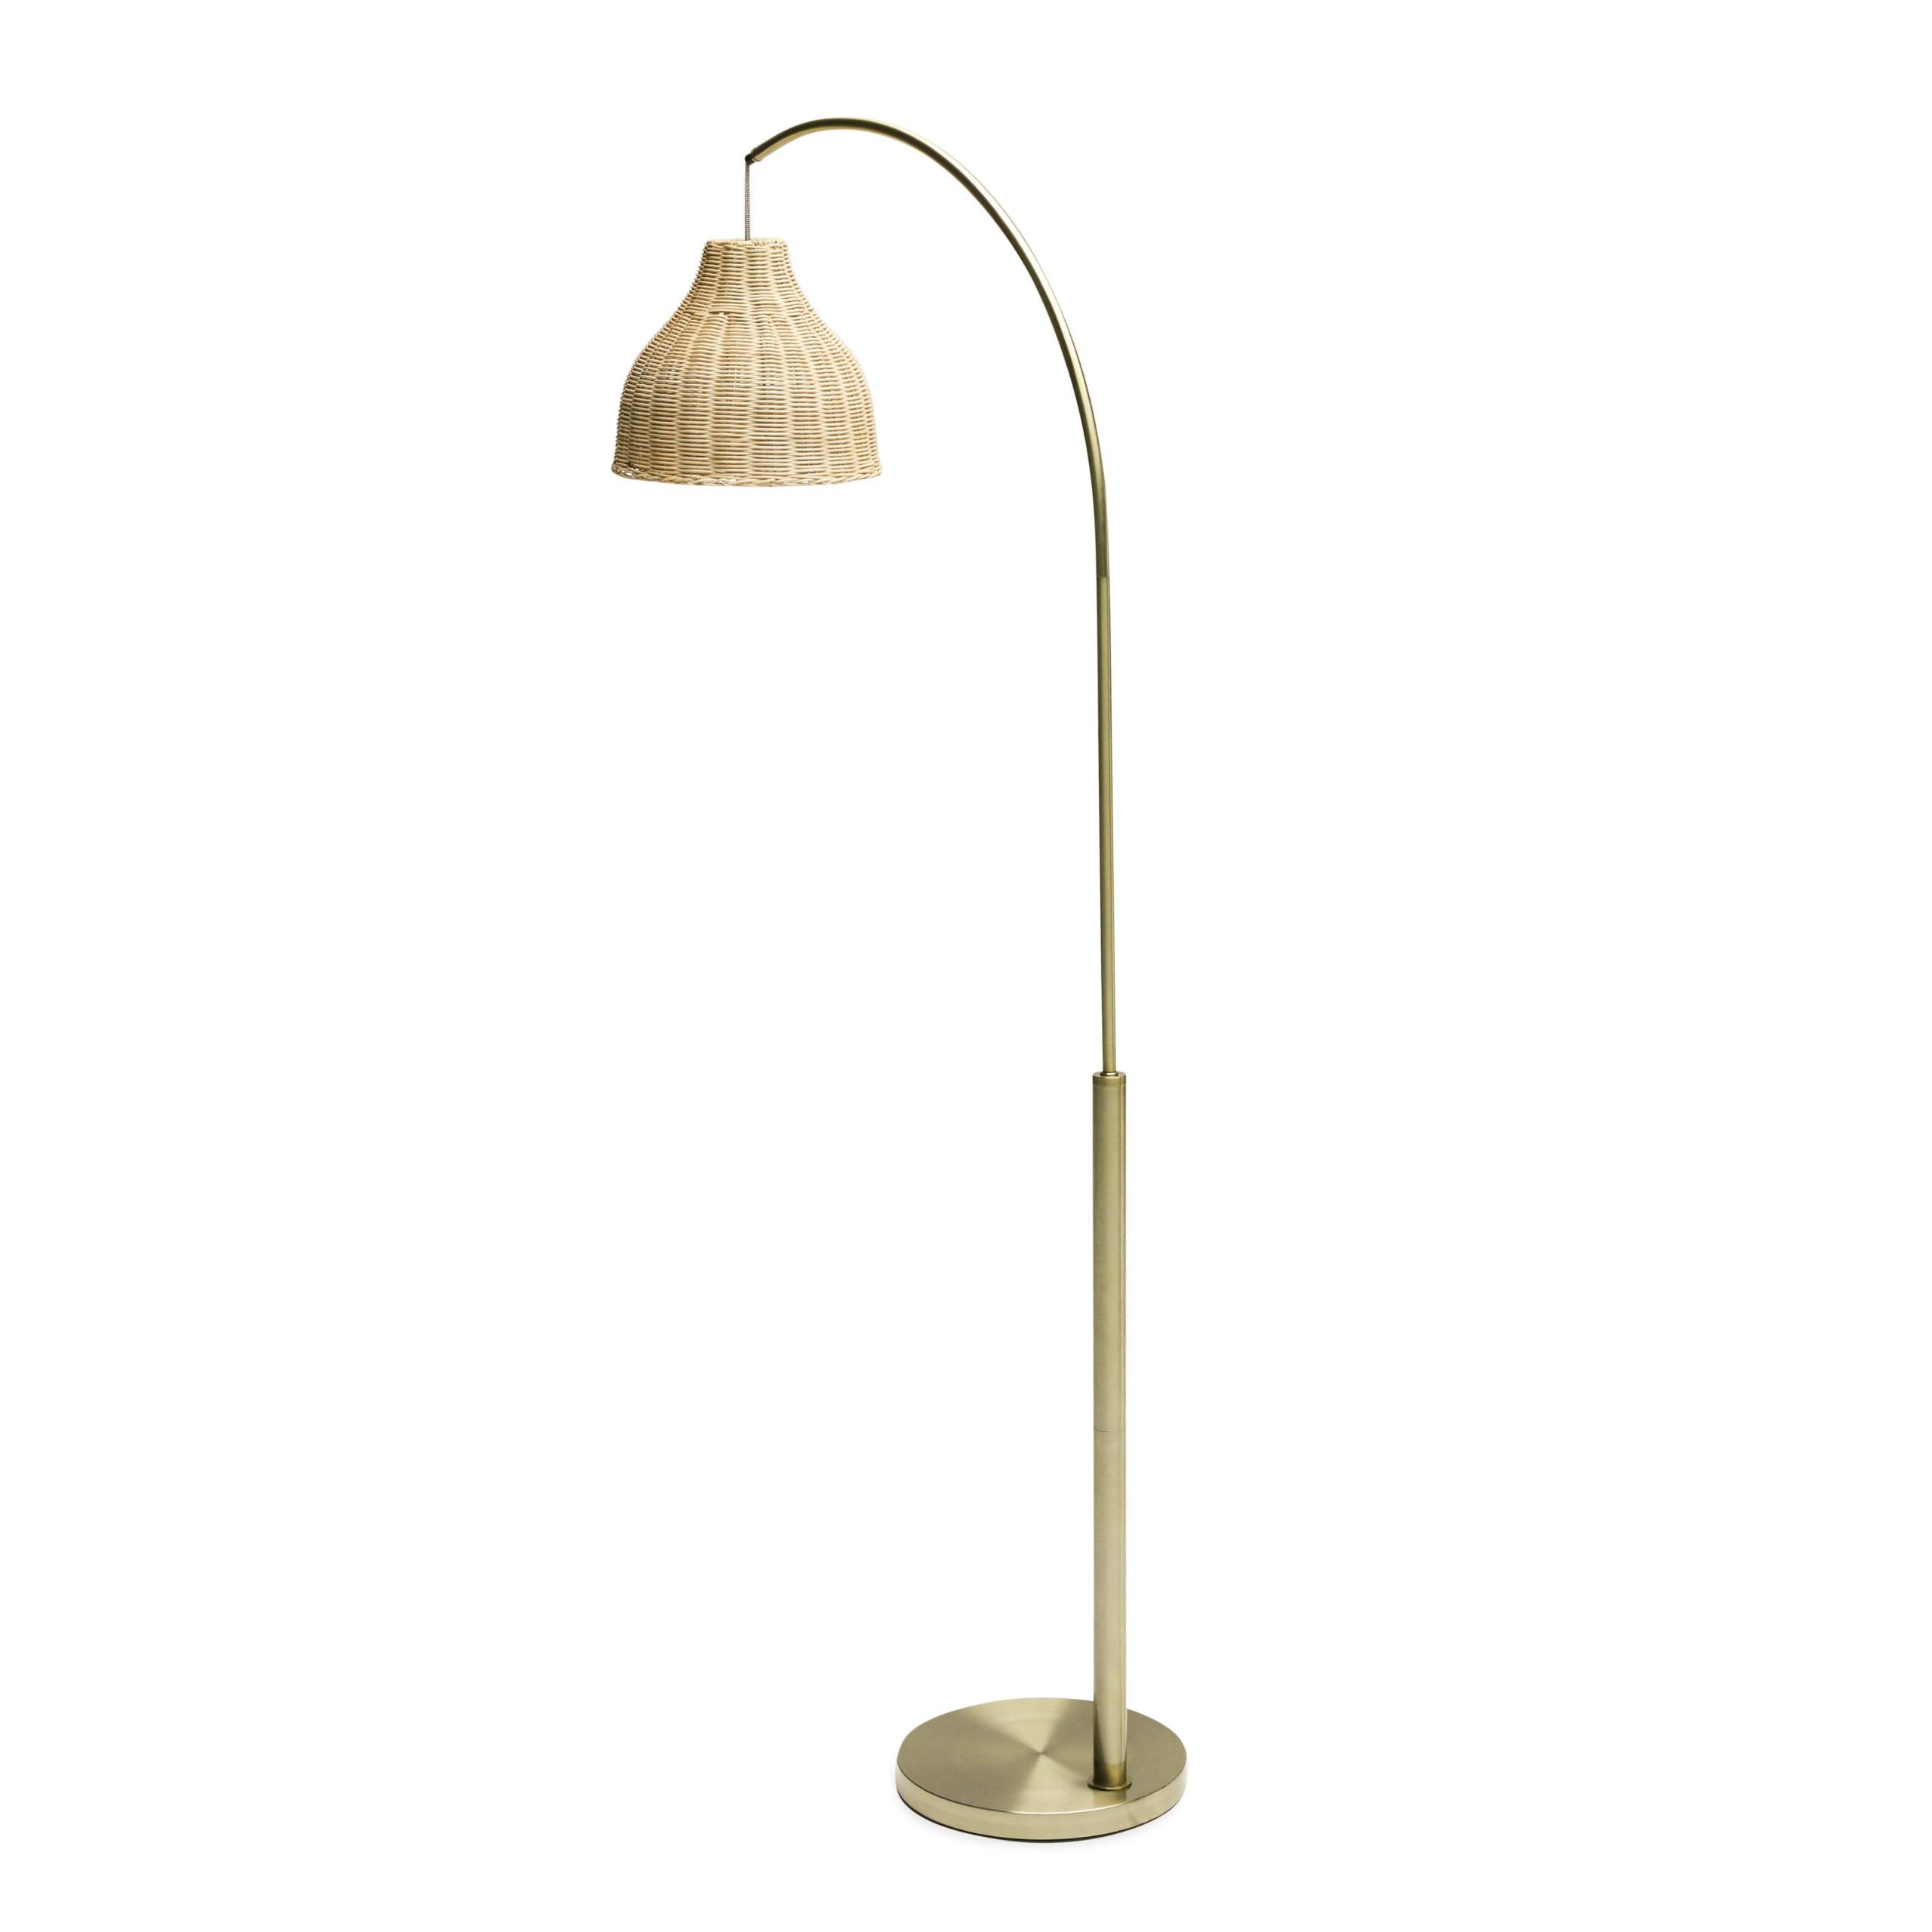 Arch Floor Lamp With Rattan Shadedrew Barrymore Flower Home, Antique  Brass – Walmart For Rattan Floor Lamps (View 13 of 20)